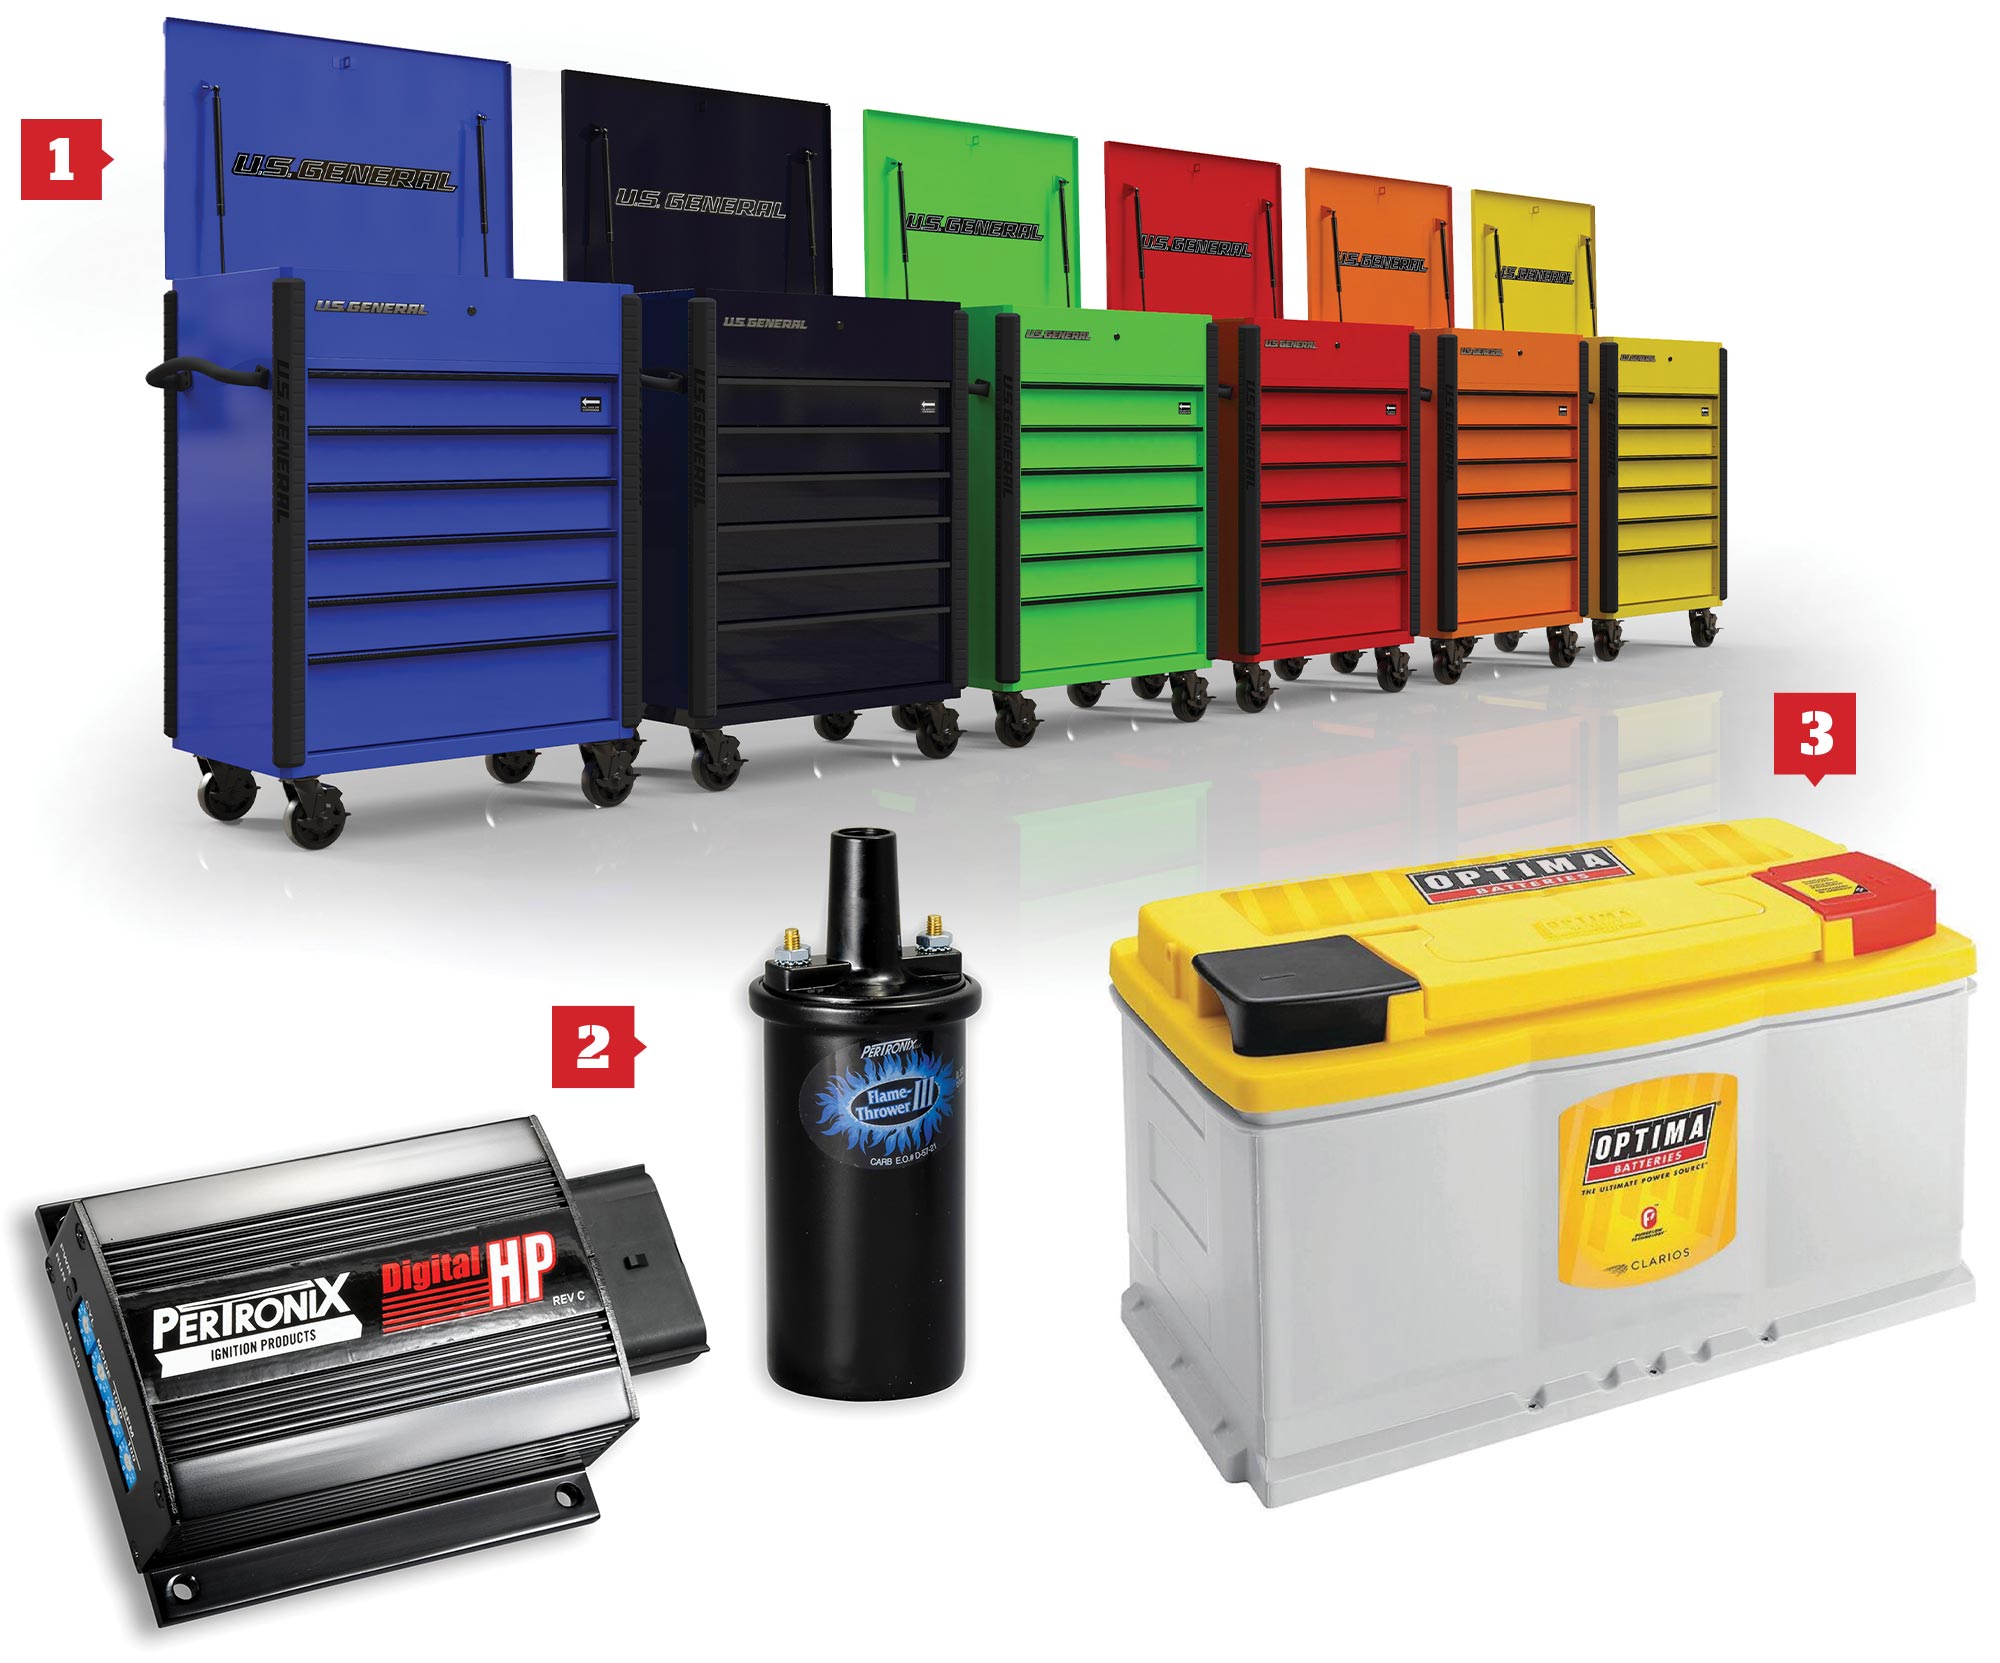 Harbor Freight Tools 34-inch, full-bank service carts in various colors; PerTronix’s 510C Digital HP ignition box; Optima’s YellowTop DH7 battery